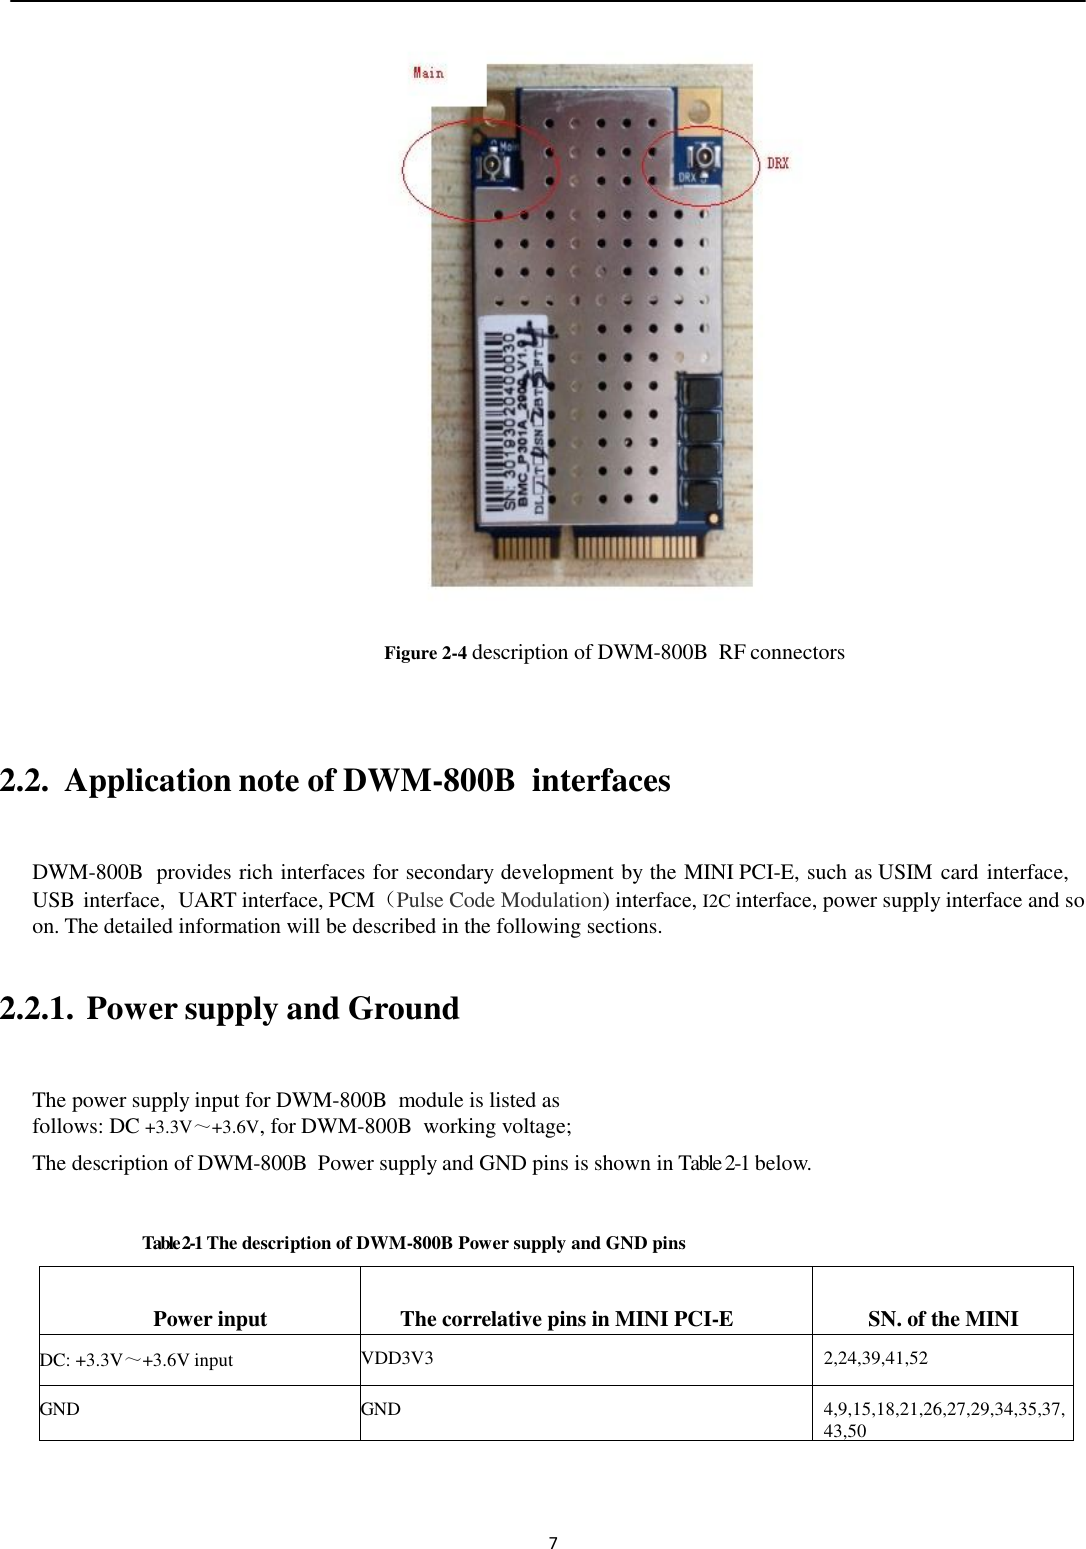   7                       Figure 2-4 description of DWM-800B  RF connectors   2.2.  Application note of DWM-800B  interfaces  DWM-800B  provides rich interfaces for secondary development by the MINI PCI-E, such as USIM card interface, USB interface,  UART interface, PCM（Pulse Code Modulation) interface, I2C interface, power supply interface and so on. The detailed information will be described in the following sections.  2.2.1.  Power supply and Ground  The power supply input for DWM-800B  module is listed as follows: DC +3.3V～+3.6V, for DWM-800B  working voltage; The description of DWM-800B  Power supply and GND pins is shown in Table 2-1 below.  Table 2-1 The description of DWM-800B Power supply and GND pins  Power input  The correlative pins in MINI PCI-E  SN. of the MINI PCI-E DC: +3.3V～+3.6V input VDD3V3 2,24,39,41,52 GND GND 4,9,15,18,21,26,27,29,34,35,37,43,50   